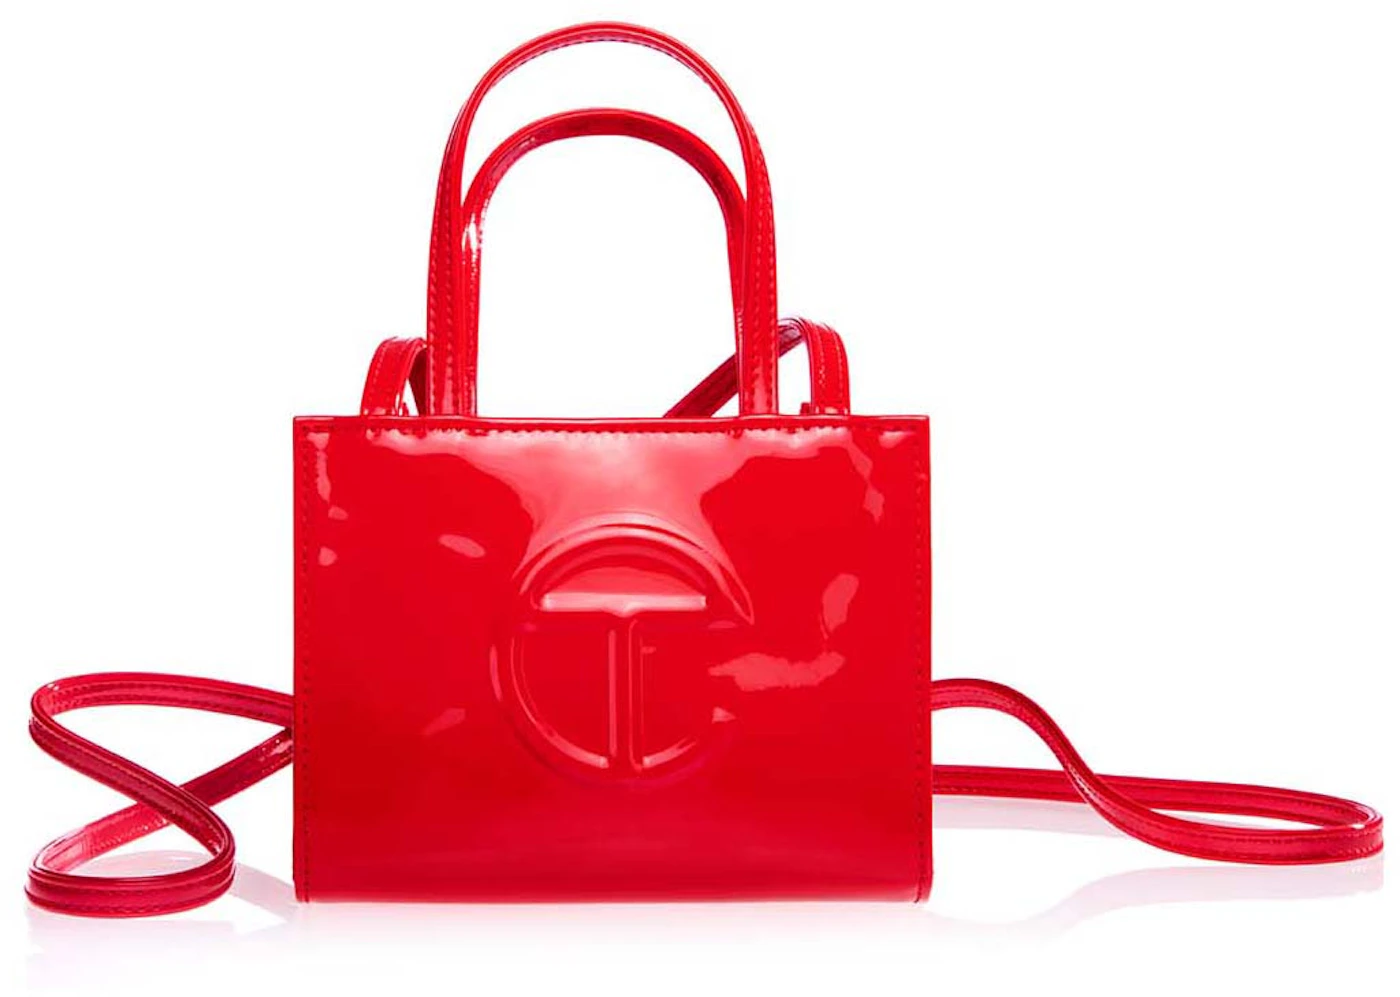 Telfar Large Patent Shopping Bag Red in Faux Leather with Silver